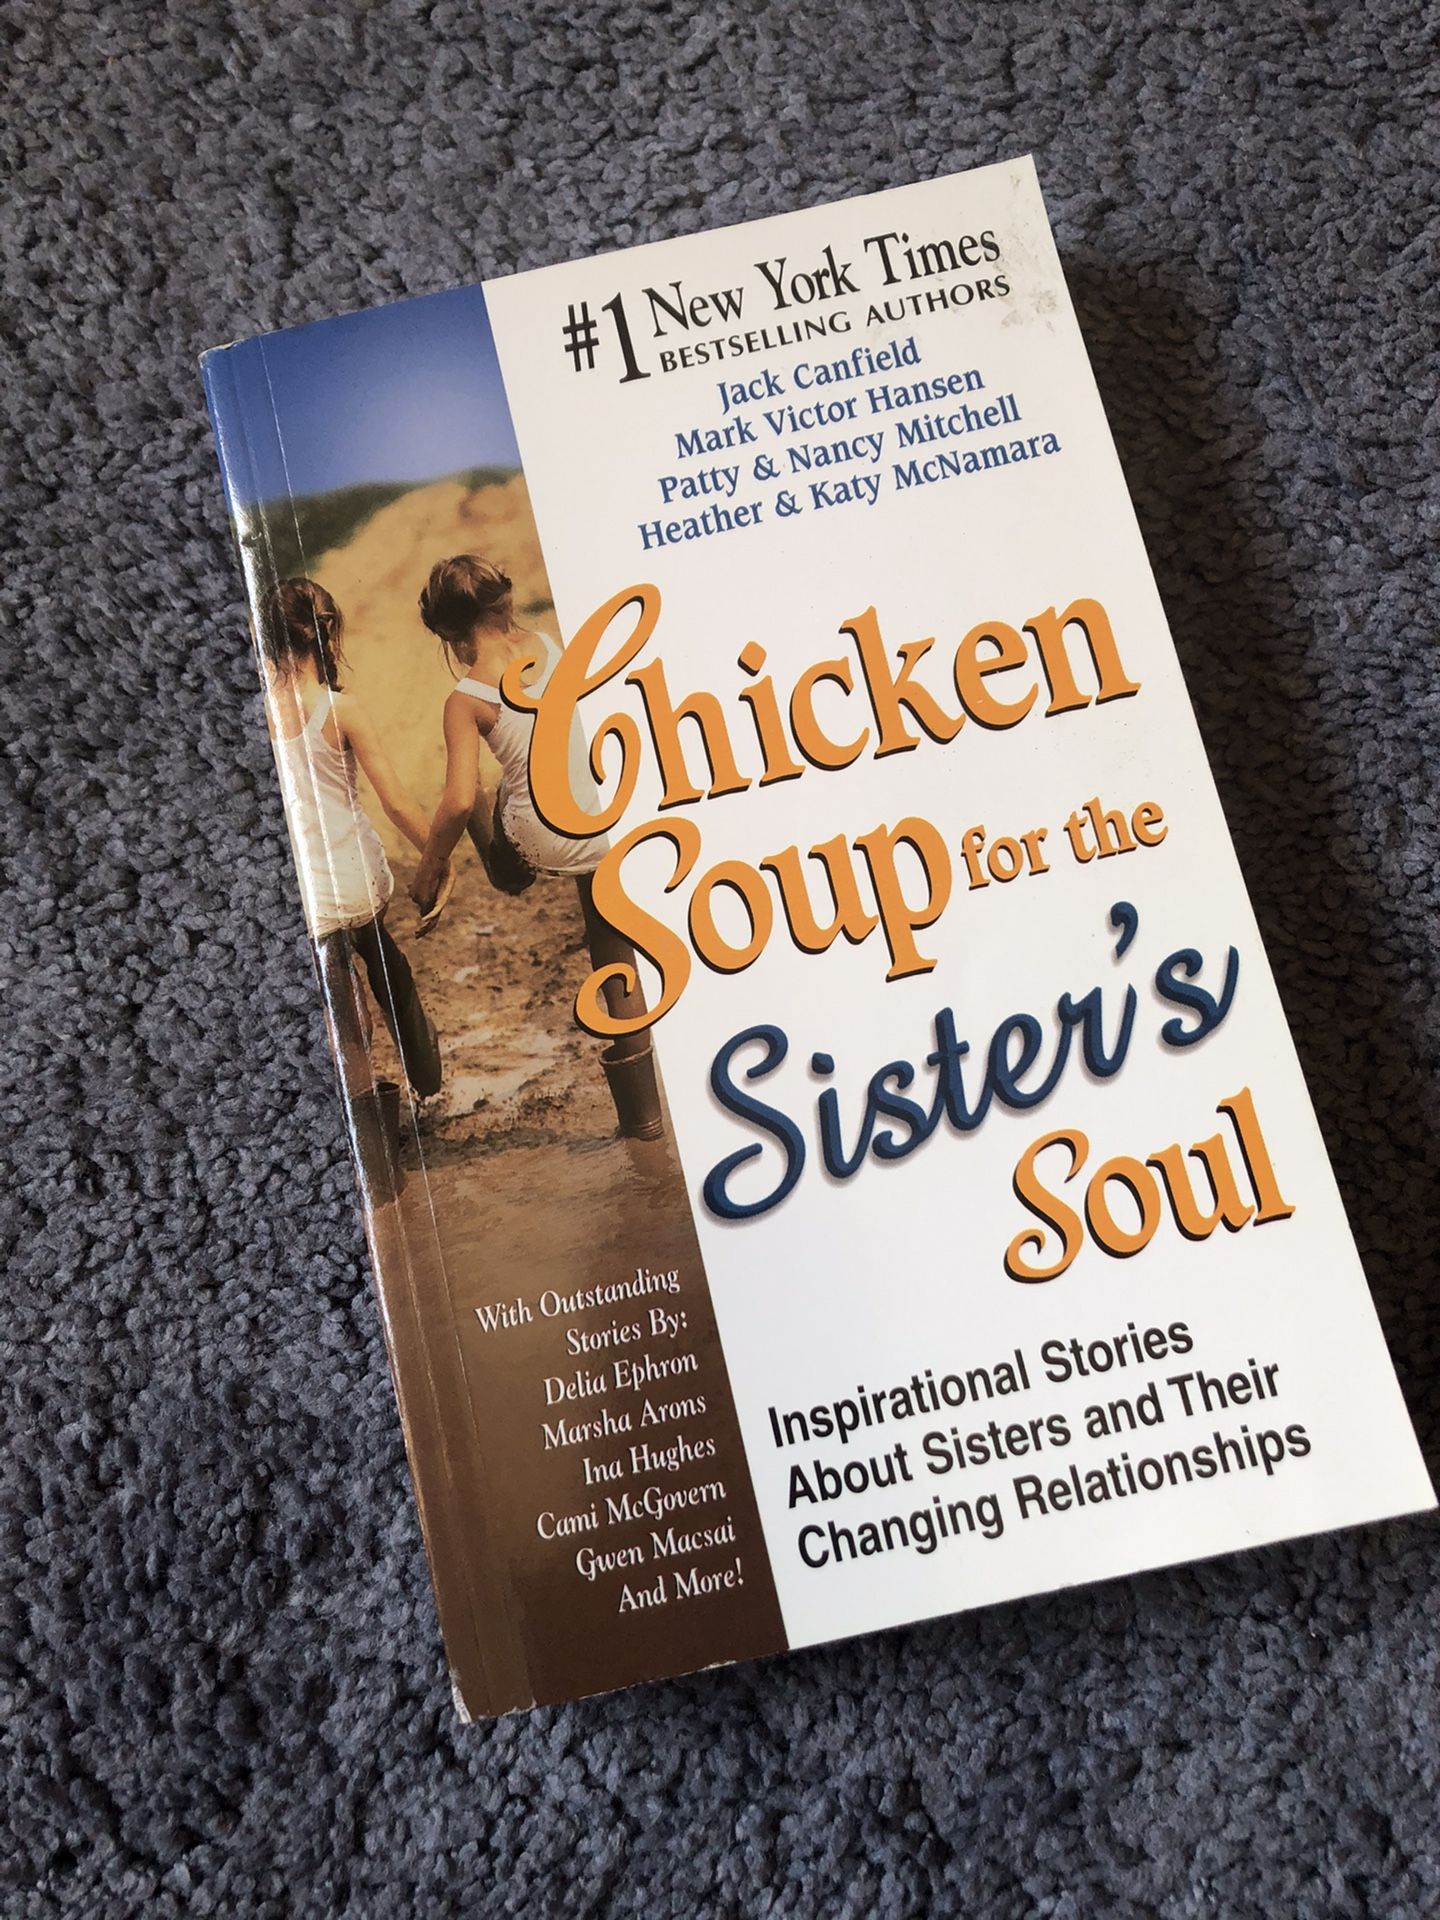 Chicken Soup for Sisters Soul Book